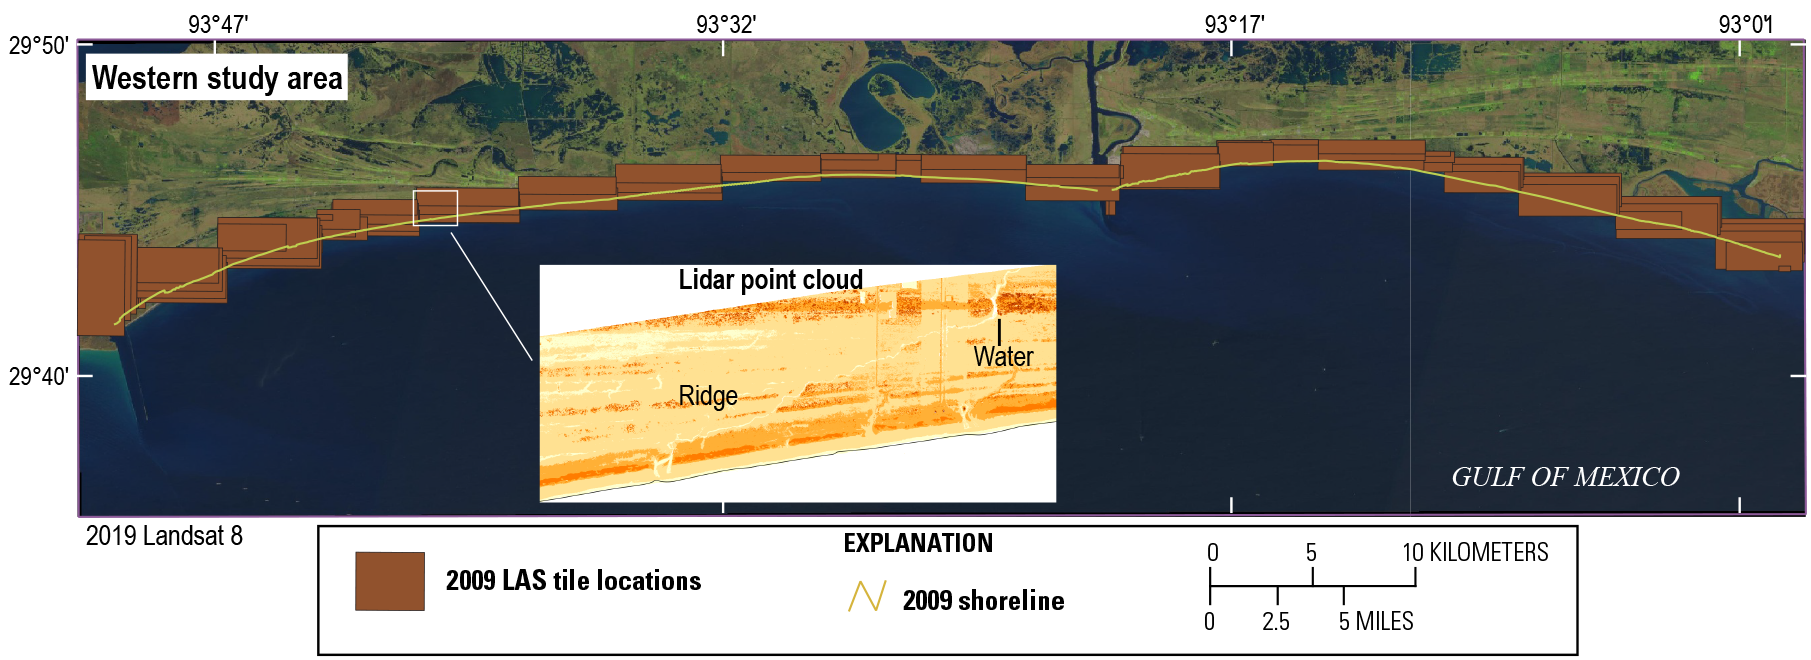 Figure 10. “Ridge” and “water” are labeled on the inset point-cloud image.